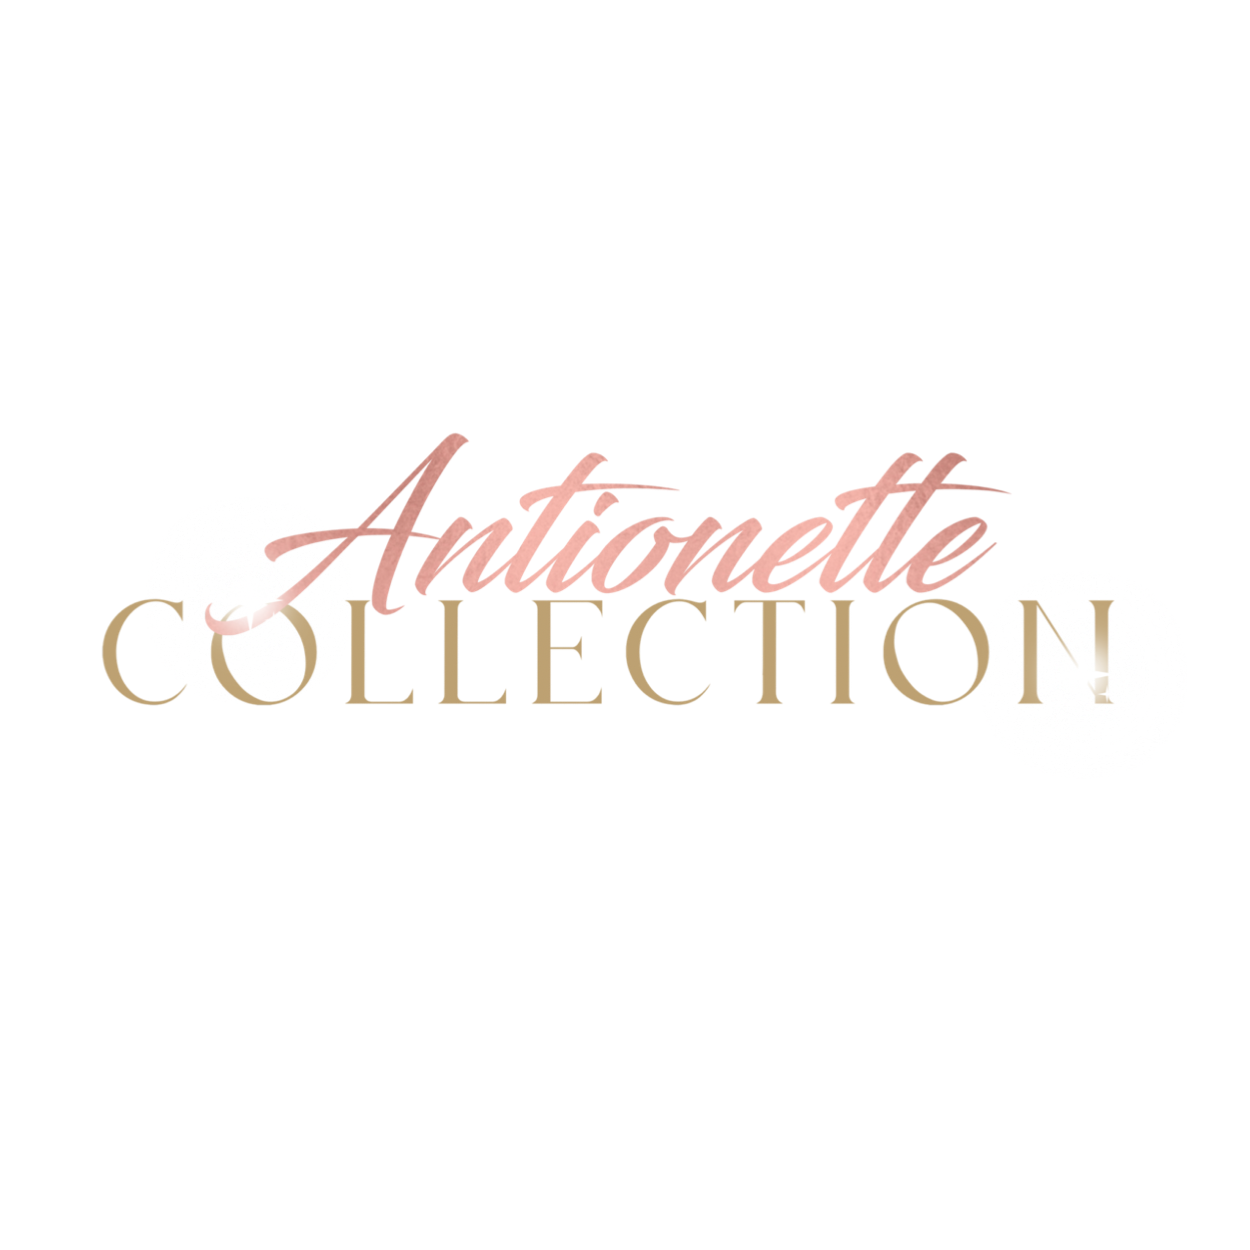 Antionette Collection, LLC